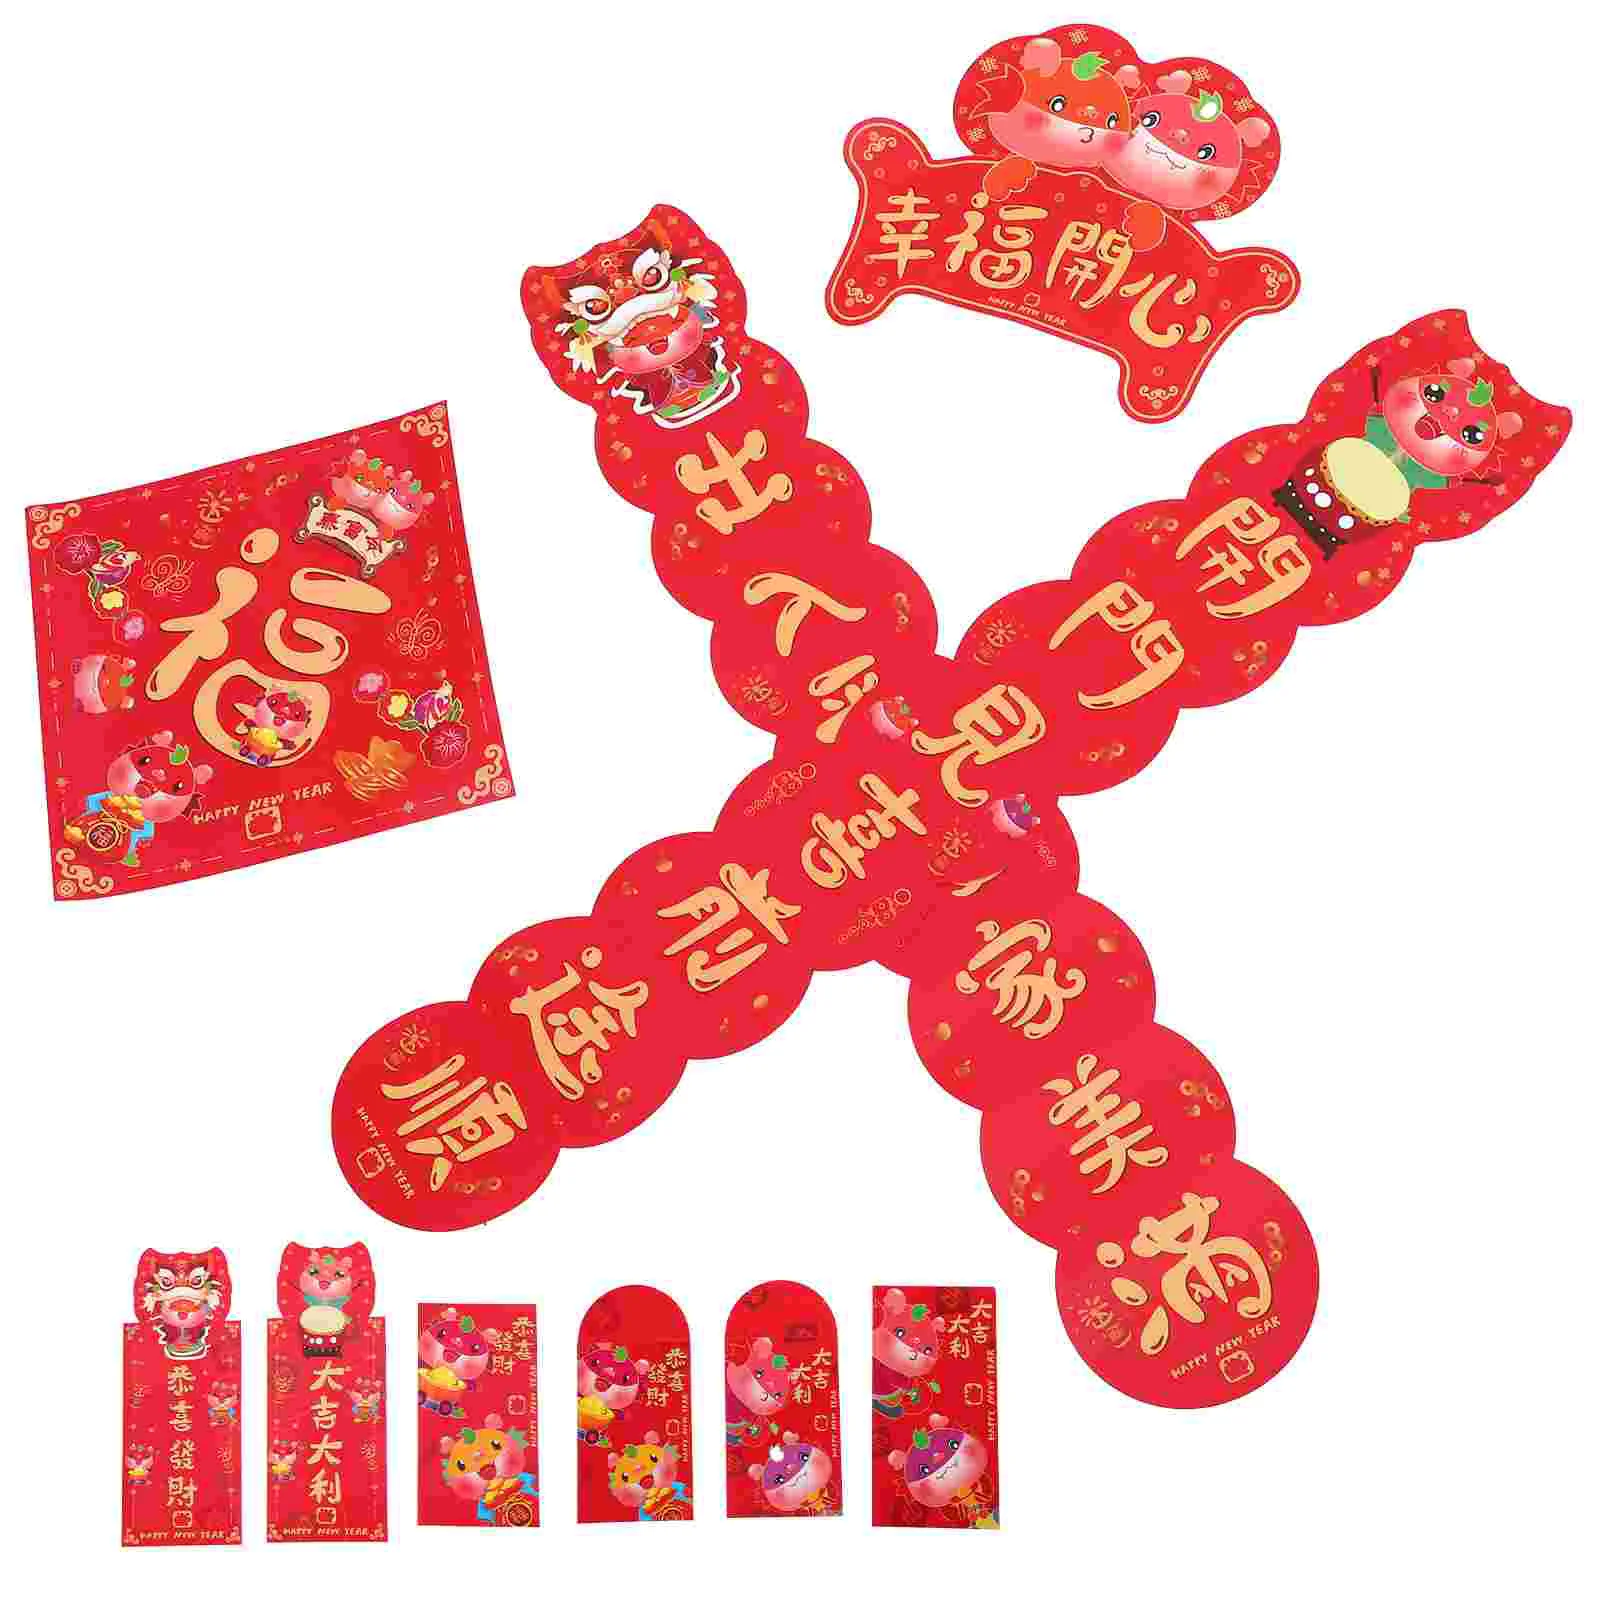 

1 Set Dragon Year Red Packets and Festive Couplets Door Couplets Spring Festival Decor